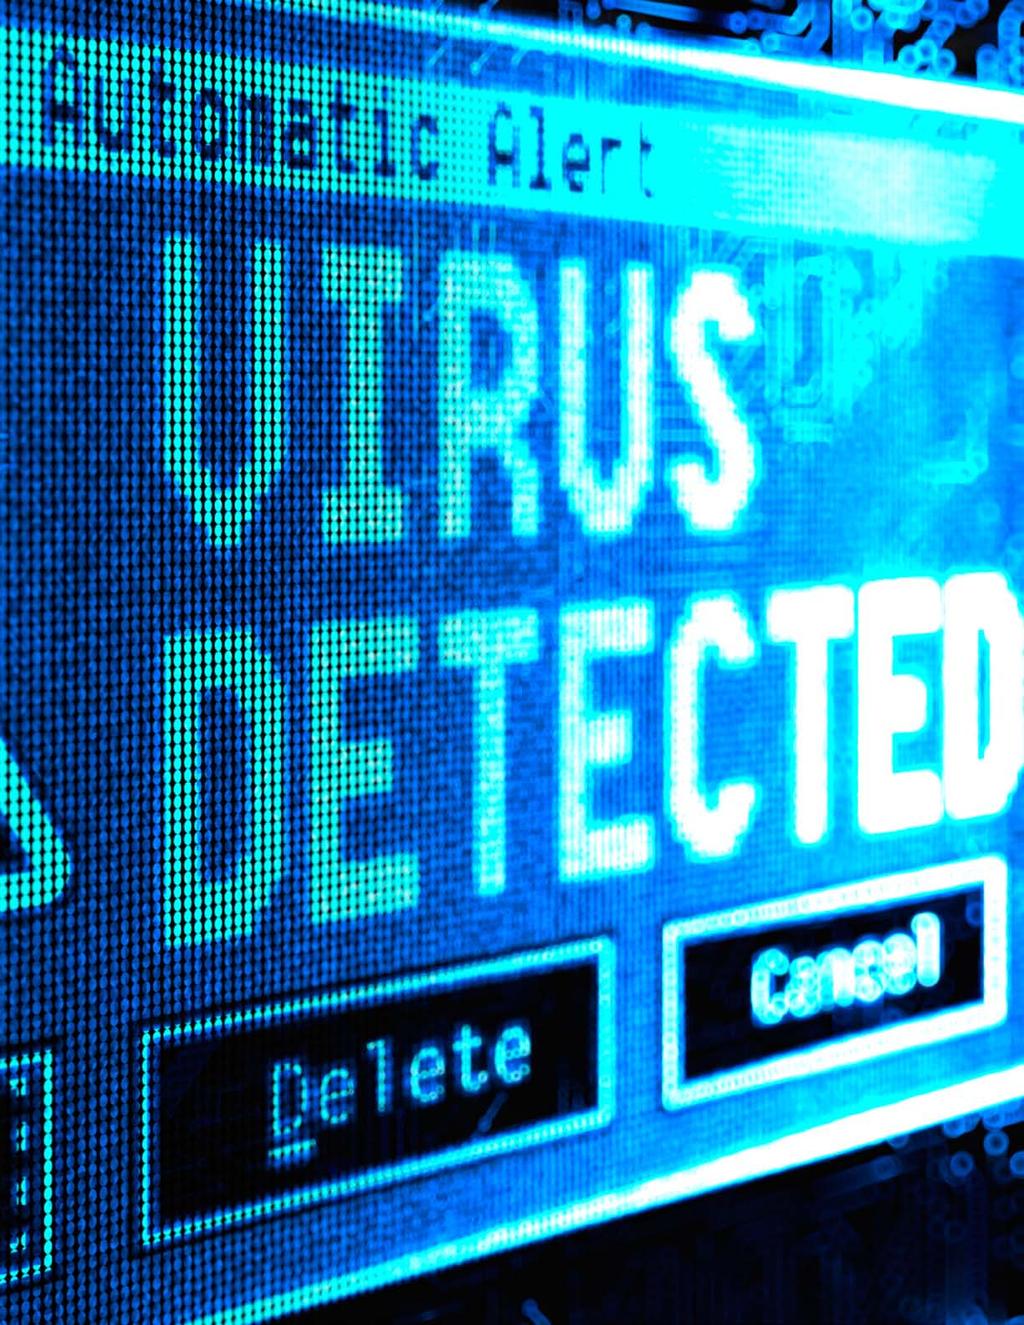 A leading antivirus software company outsmarts viruses and malware and makes the Internet safer.